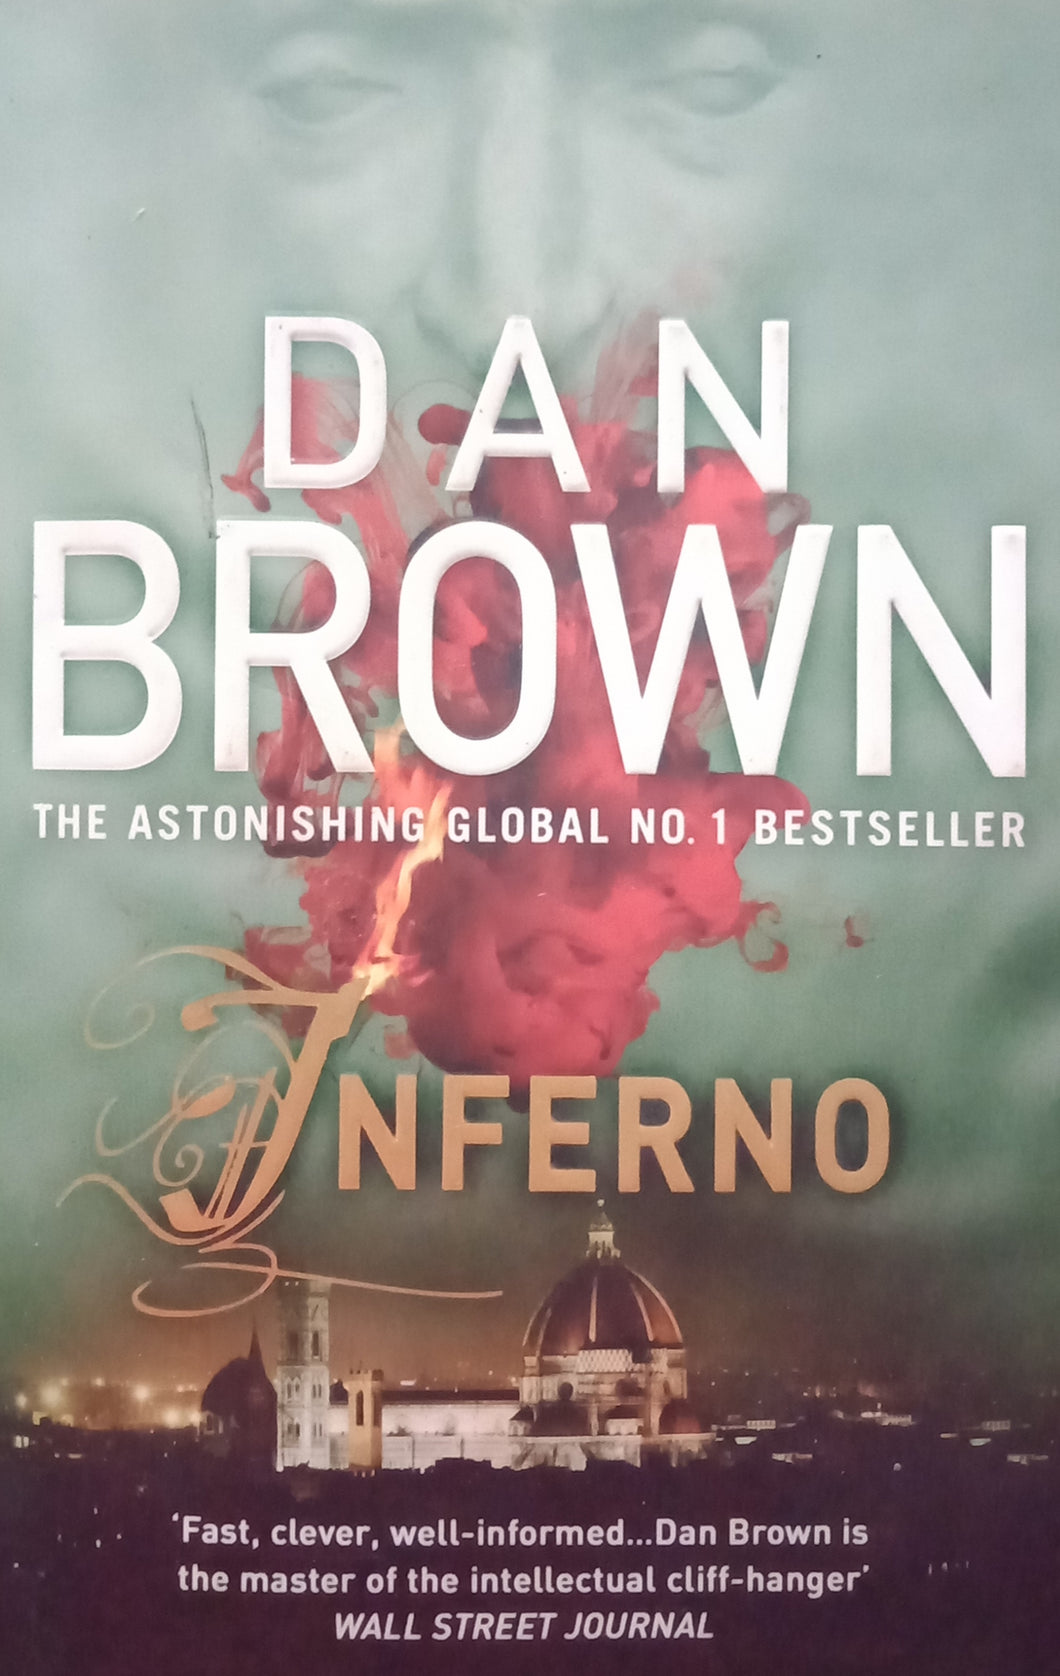 Inferno 'Fast Clever, Well-Informed... by Dan Brown